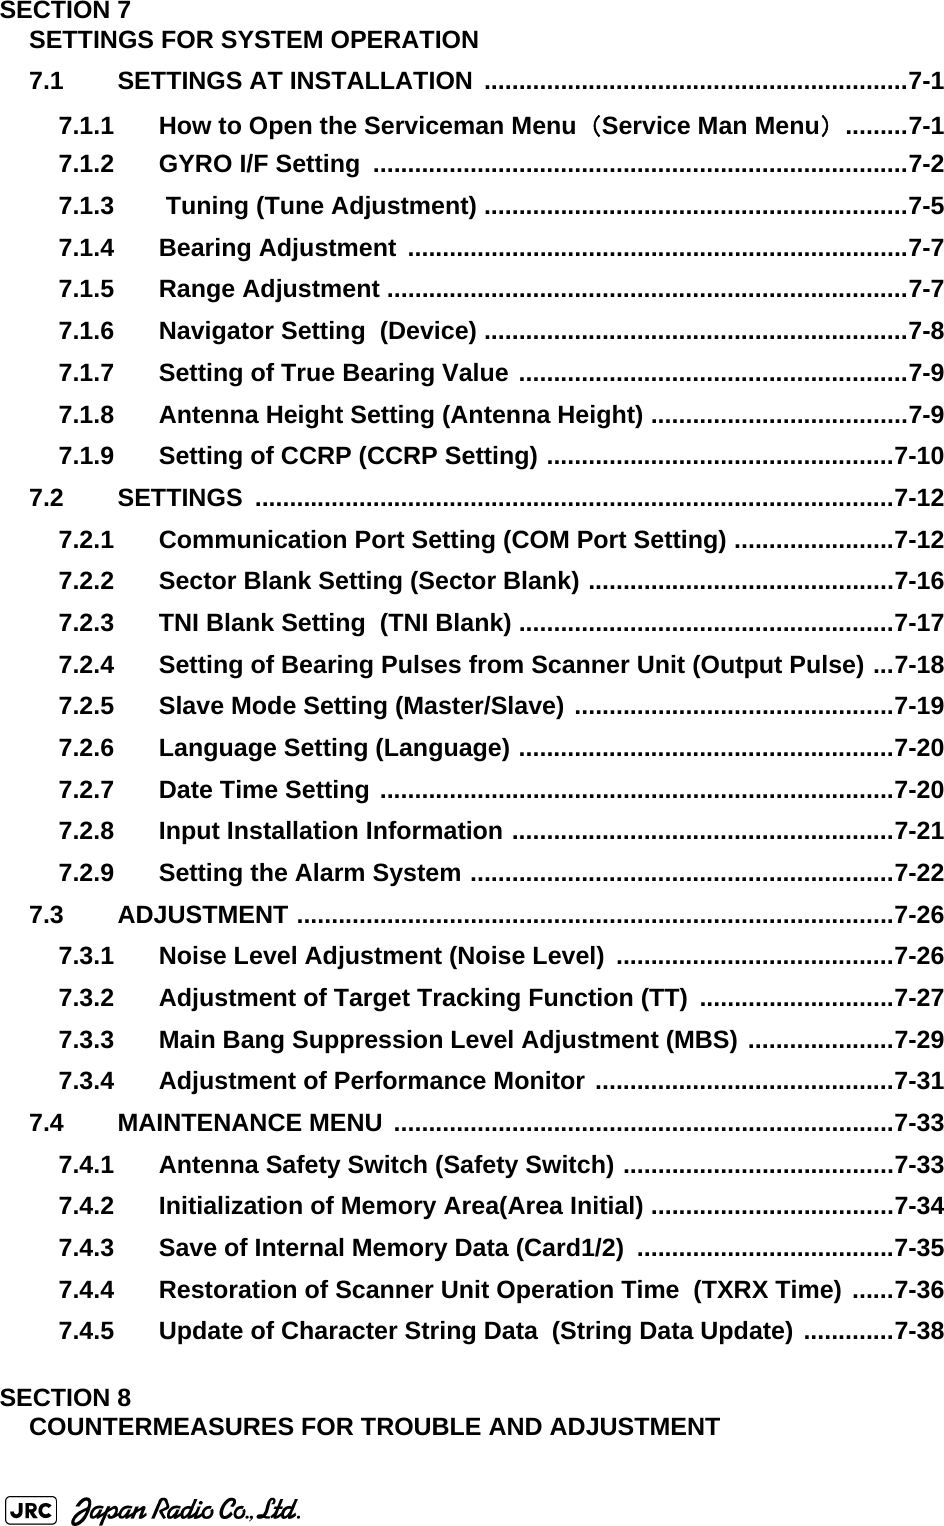 SECTION 7SETTINGS FOR SYSTEM OPERATION7.1 SETTINGS AT INSTALLATION  .............................................................7-17.1.1 How to Open the Serviceman Menu（Service Man Menu） .........7-17.1.2 GYRO I/F Setting  .............................................................................7-27.1.3  Tuning (Tune Adjustment) .............................................................7-57.1.4 Bearing Adjustment ........................................................................7-77.1.5 Range Adjustment ...........................................................................7-77.1.6 Navigator Setting  (Device) .............................................................7-87.1.7 Setting of True Bearing Value ........................................................7-97.1.8 Antenna Height Setting (Antenna Height) .....................................7-97.1.9 Setting of CCRP (CCRP Setting) ..................................................7-107.2 SETTINGS ............................................................................................7-127.2.1 Communication Port Setting (COM Port Setting) .......................7-127.2.2 Sector Blank Setting (Sector Blank) ............................................7-167.2.3 TNI Blank Setting  (TNI Blank) ......................................................7-177.2.4 Setting of Bearing Pulses from Scanner Unit (Output Pulse) ...7-187.2.5 Slave Mode Setting (Master/Slave) ..............................................7-197.2.6 Language Setting (Language) ......................................................7-207.2.7 Date Time Setting ..........................................................................7-207.2.8 Input Installation Information .......................................................7-217.2.9 Setting the Alarm System .............................................................7-227.3 ADJUSTMENT ......................................................................................7-267.3.1 Noise Level Adjustment (Noise Level)  ........................................7-267.3.2 Adjustment of Target Tracking Function (TT) ............................7-277.3.3 Main Bang Suppression Level Adjustment (MBS) .....................7-297.3.4 Adjustment of Performance Monitor ...........................................7-317.4 MAINTENANCE MENU ........................................................................7-337.4.1 Antenna Safety Switch (Safety Switch) .......................................7-337.4.2 Initialization of Memory Area(Area Initial) ...................................7-347.4.3 Save of Internal Memory Data (Card1/2)  .....................................7-357.4.4 Restoration of Scanner Unit Operation Time  (TXRX Time) ......7-367.4.5 Update of Character String Data  (String Data Update) .............7-38SECTION 8COUNTERMEASURES FOR TROUBLE AND ADJUSTMENT